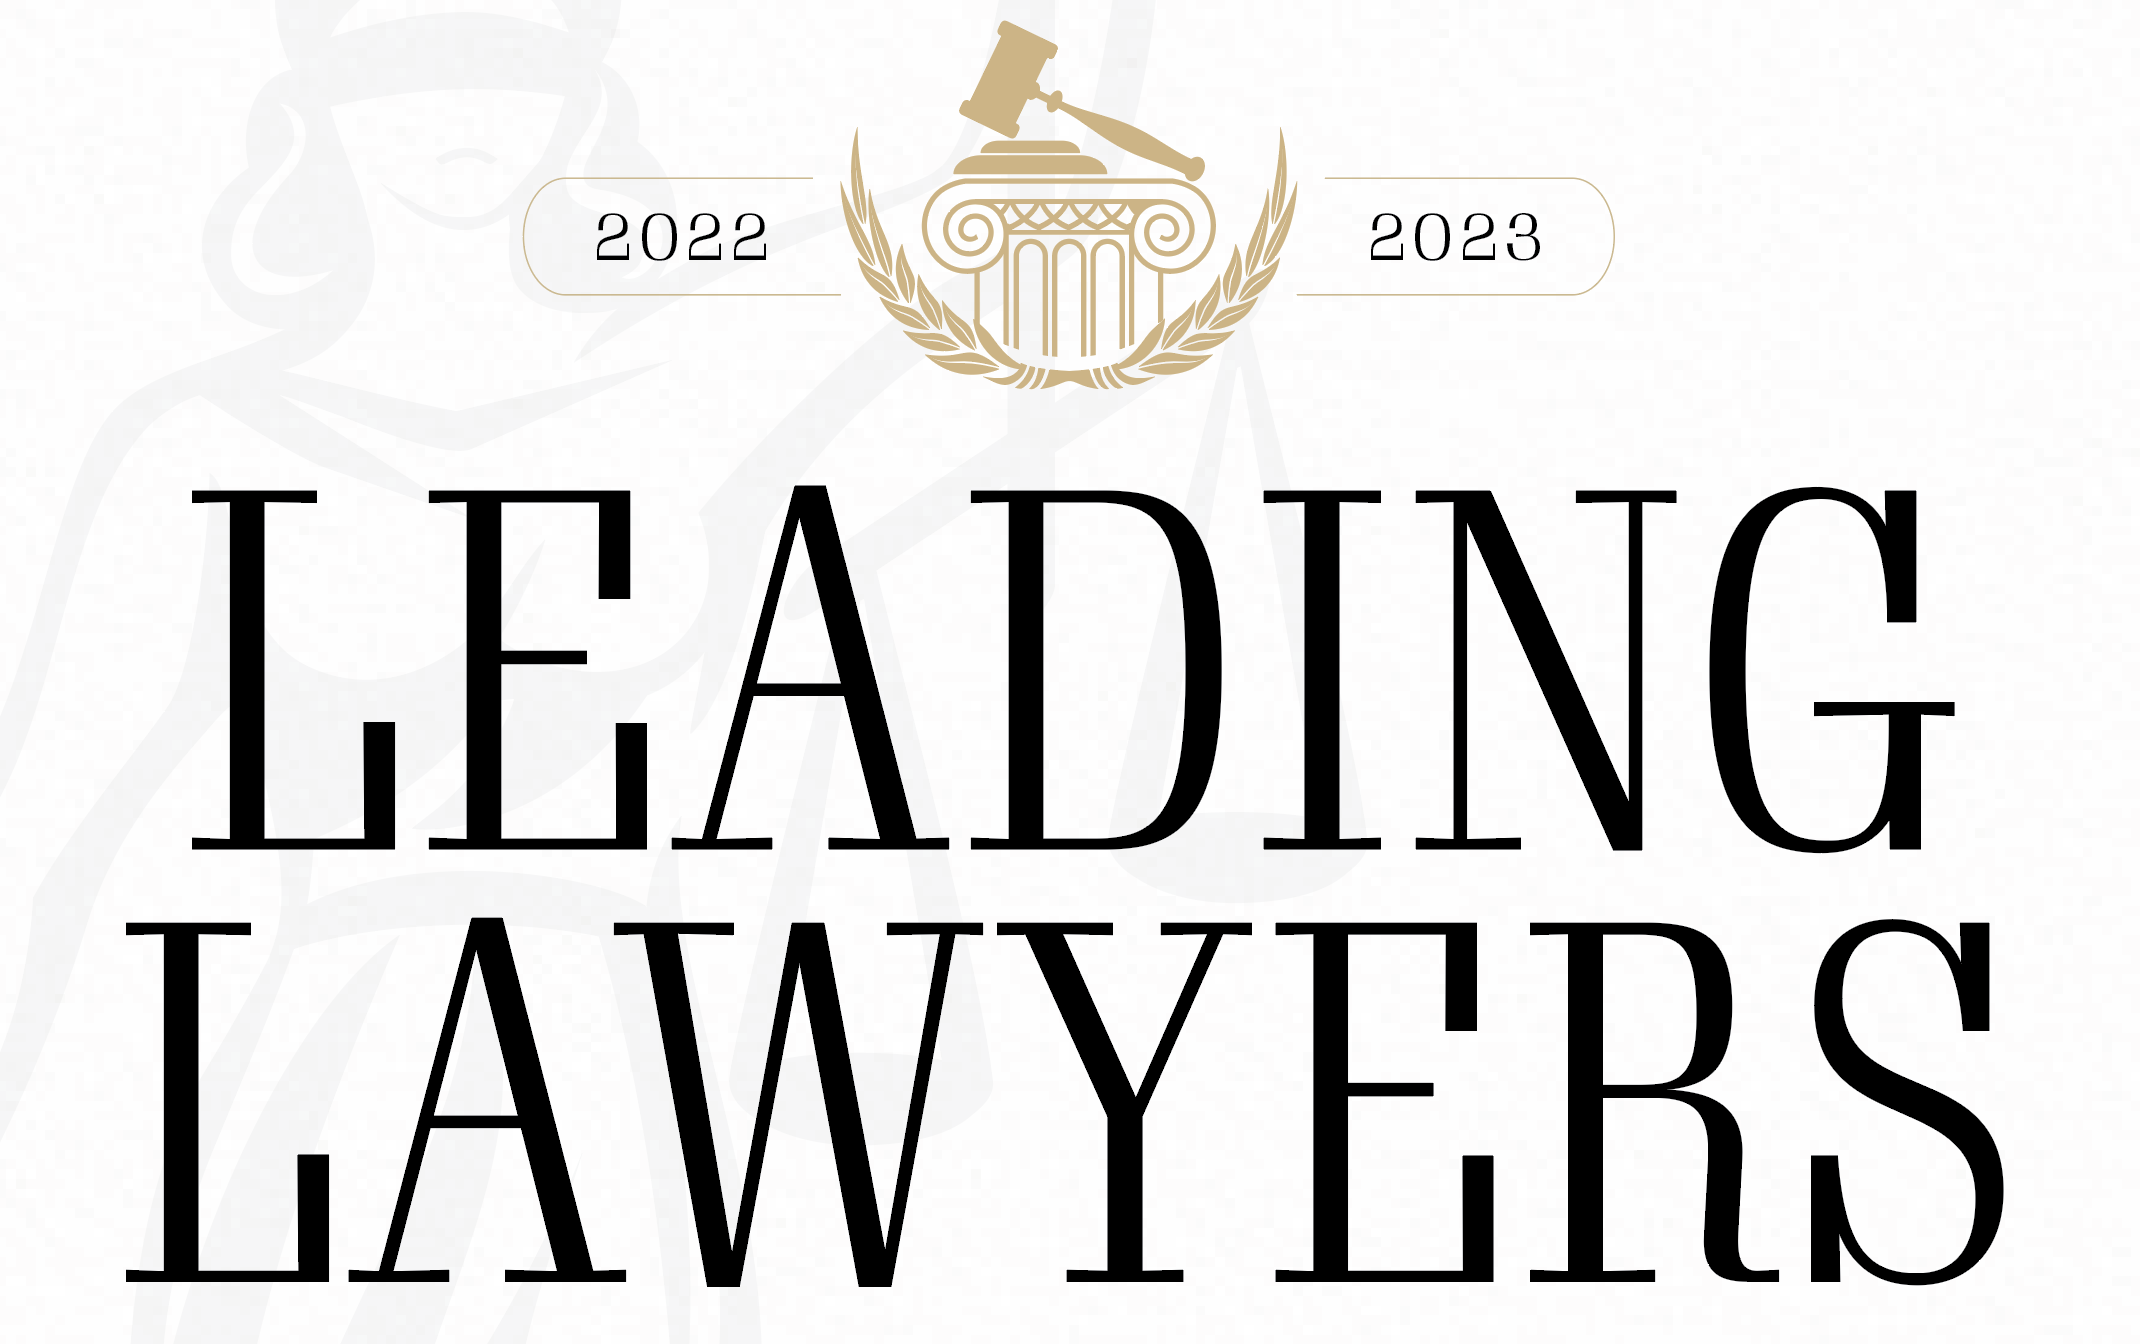 Frame & Frame Recognized as Leading Lawyers by What’s Up Media